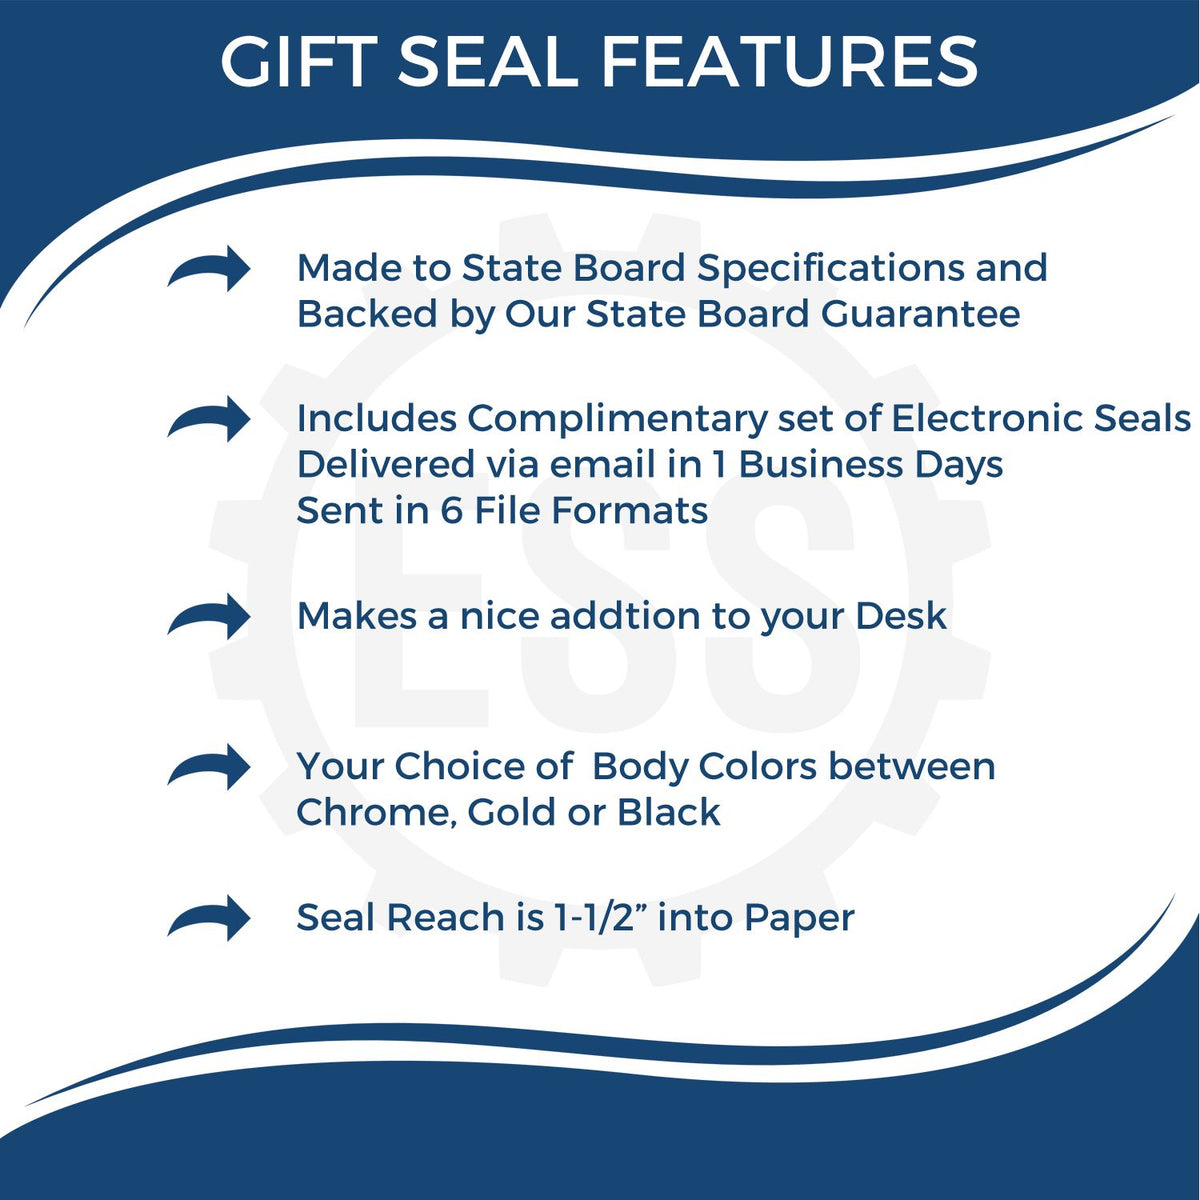 A picture of an infographic highlighting the selling points for the Gift Florida Land Surveyor Seal